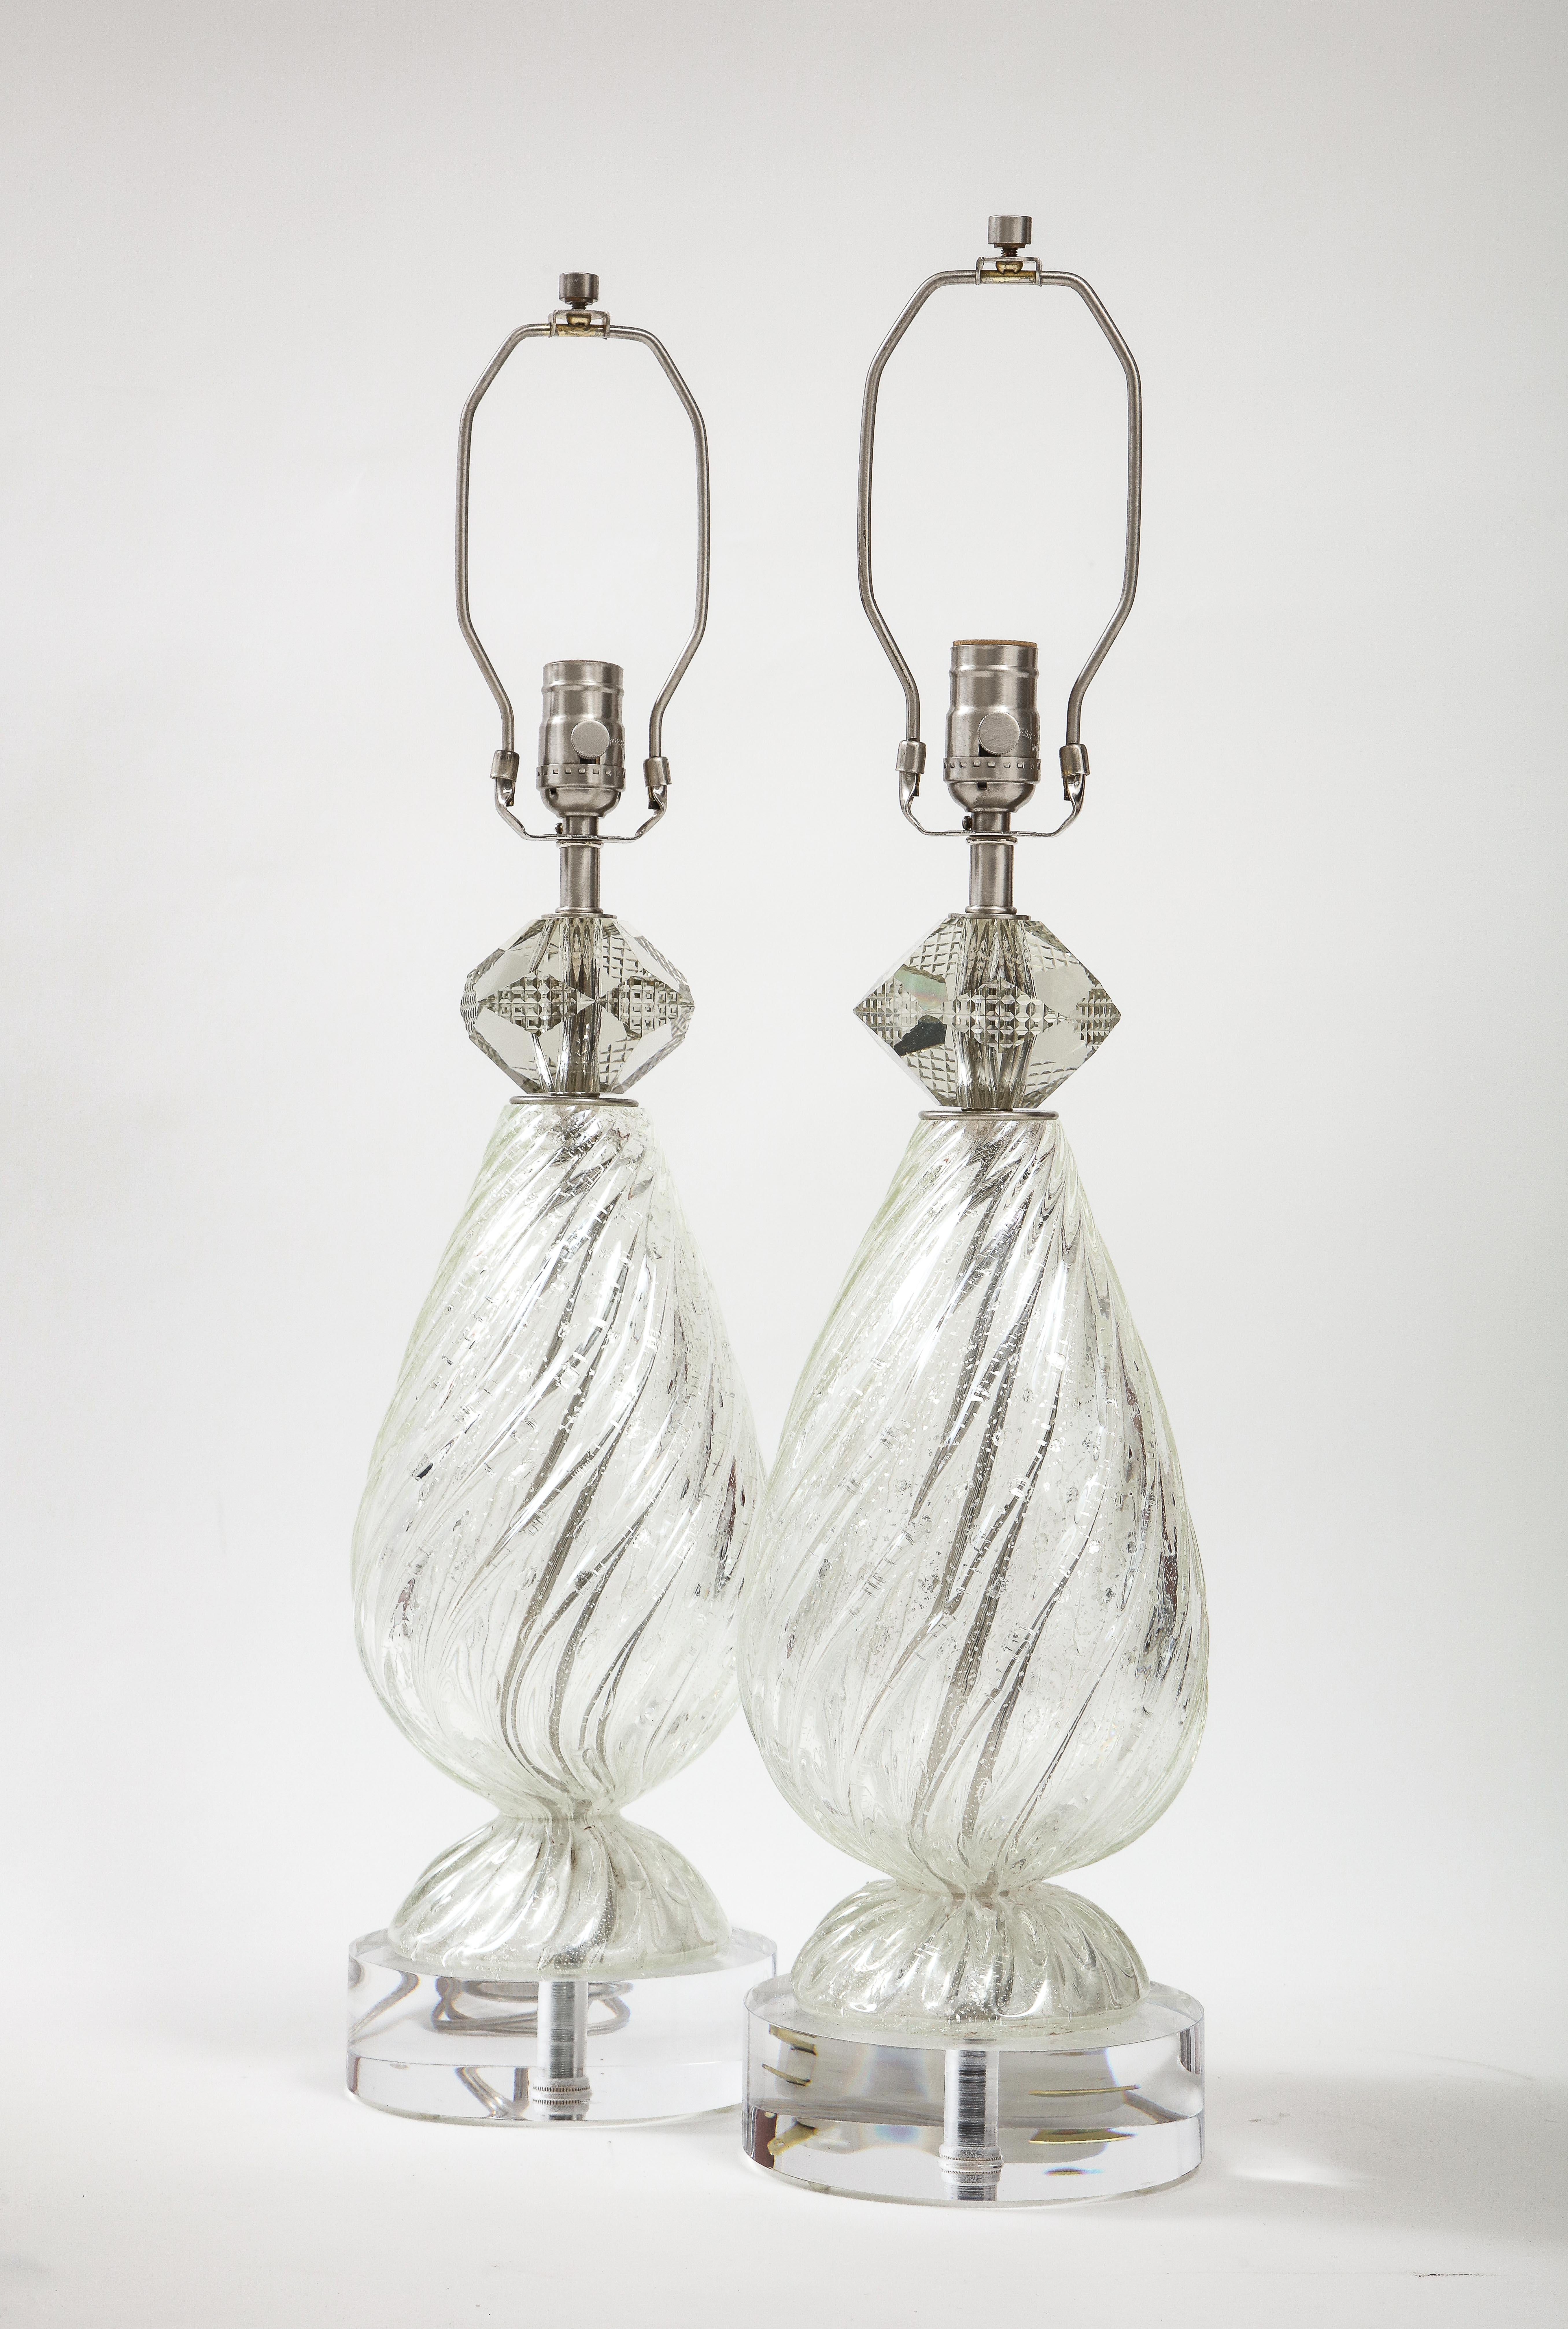 Pair of Mid Century/Art Deco Barovier Murano glass lamps featuring a swirl patterned body with metallic silver fleck inclusions. Lamps are topped by a faceted crystal orb and sit on custom Lucite bases. Rewired for use in the USA, 100W max bulbs.